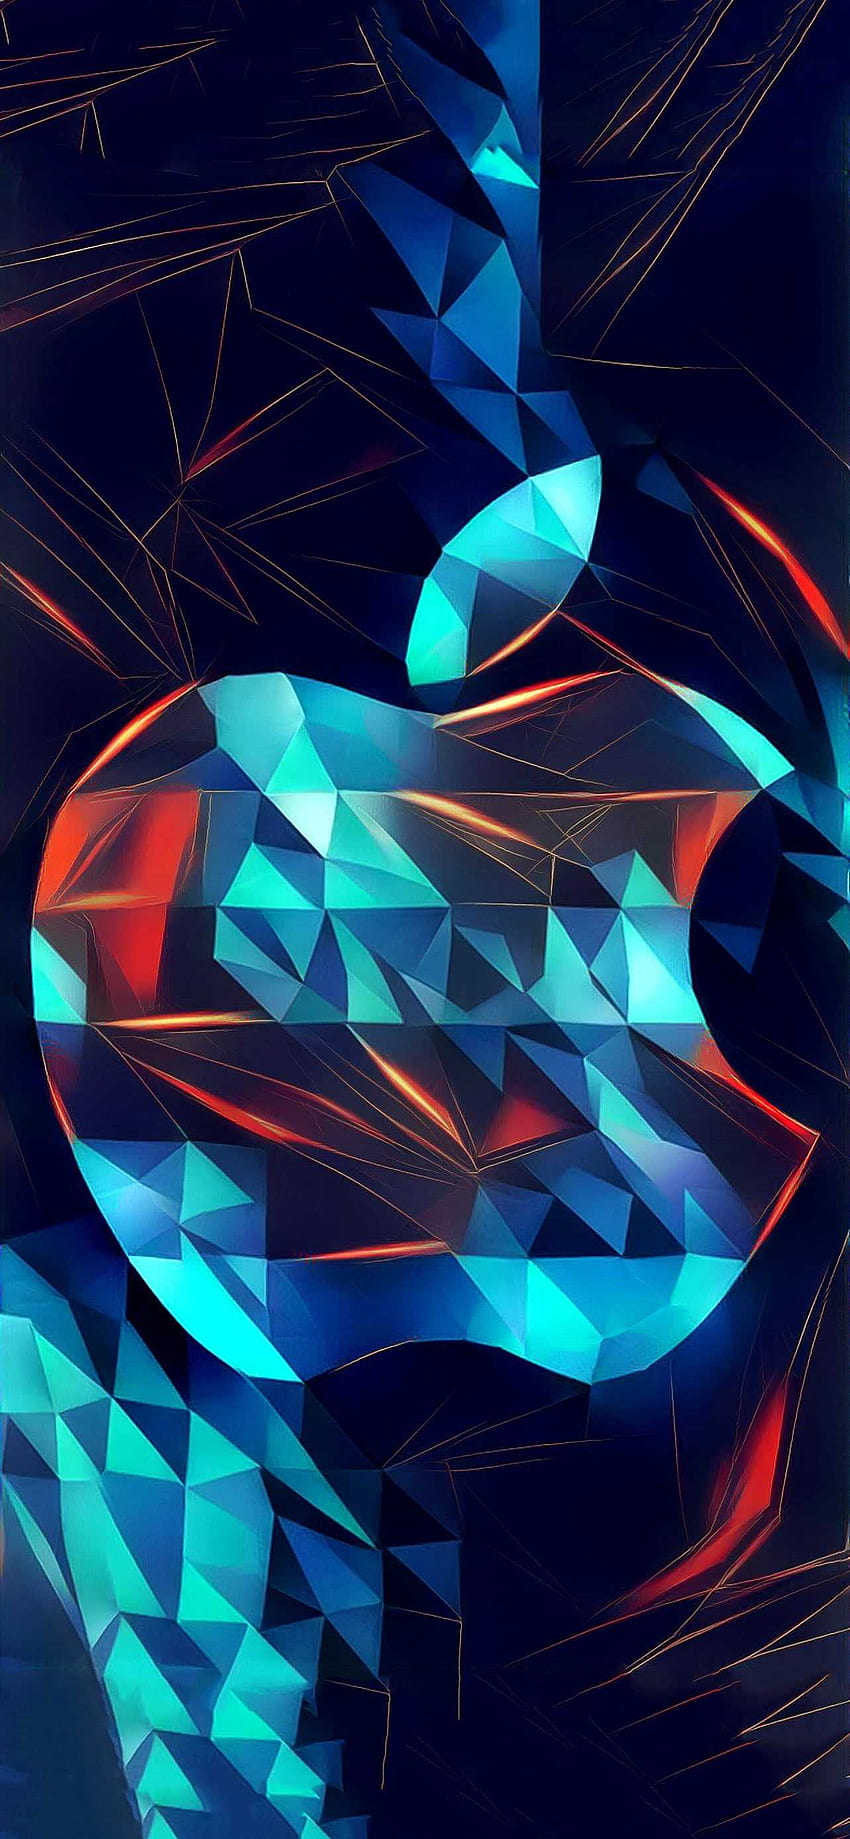 Download Apples new iPhone 13 wallpapers right here 9to5Mac